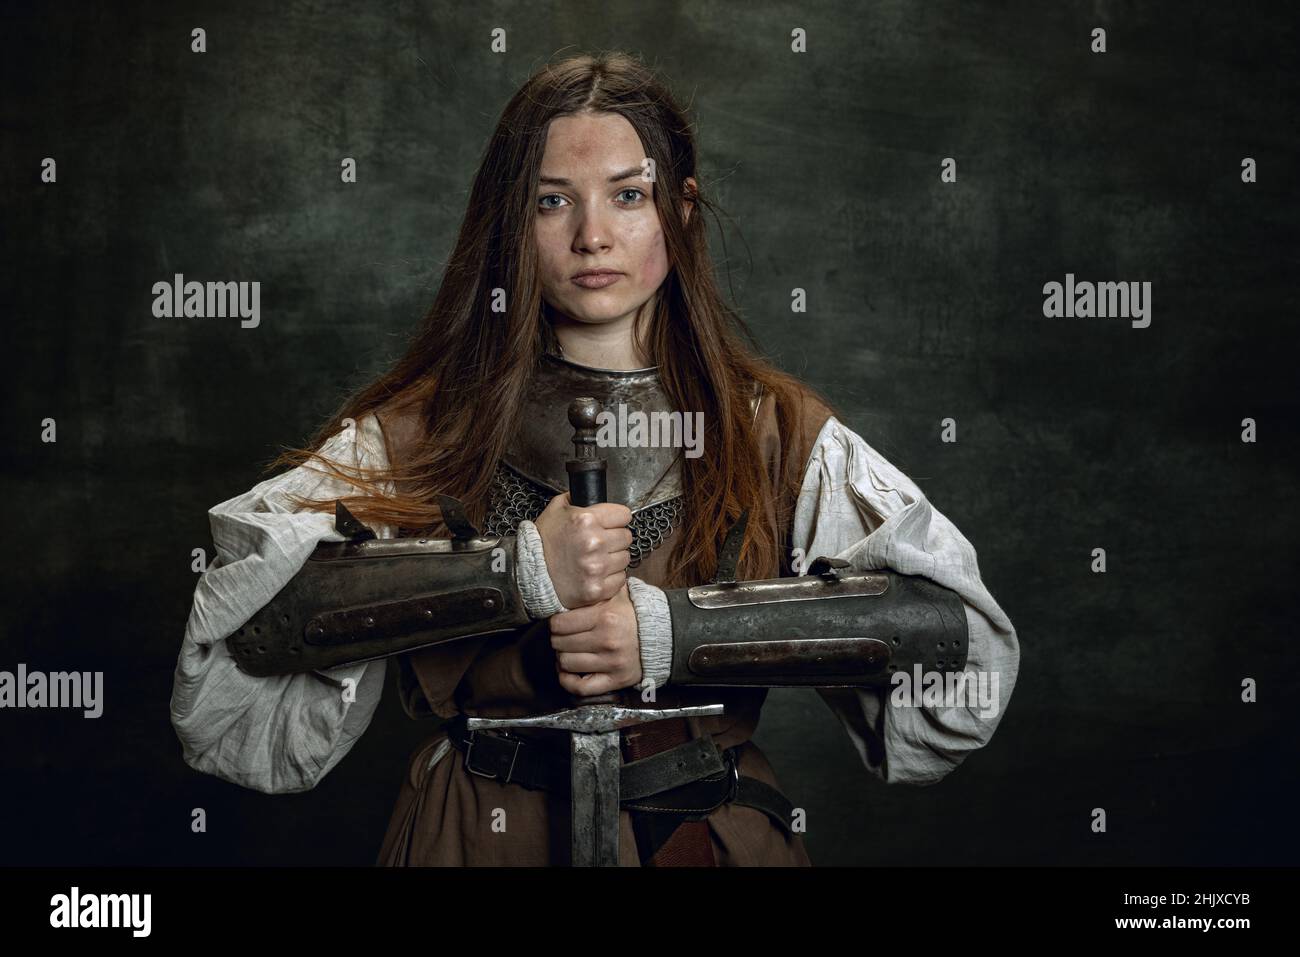 Vintage portrait of adorable woman, medieval female warrior or knight with dirty wounded face looking at camera isolated over dark retro background. Stock Photo